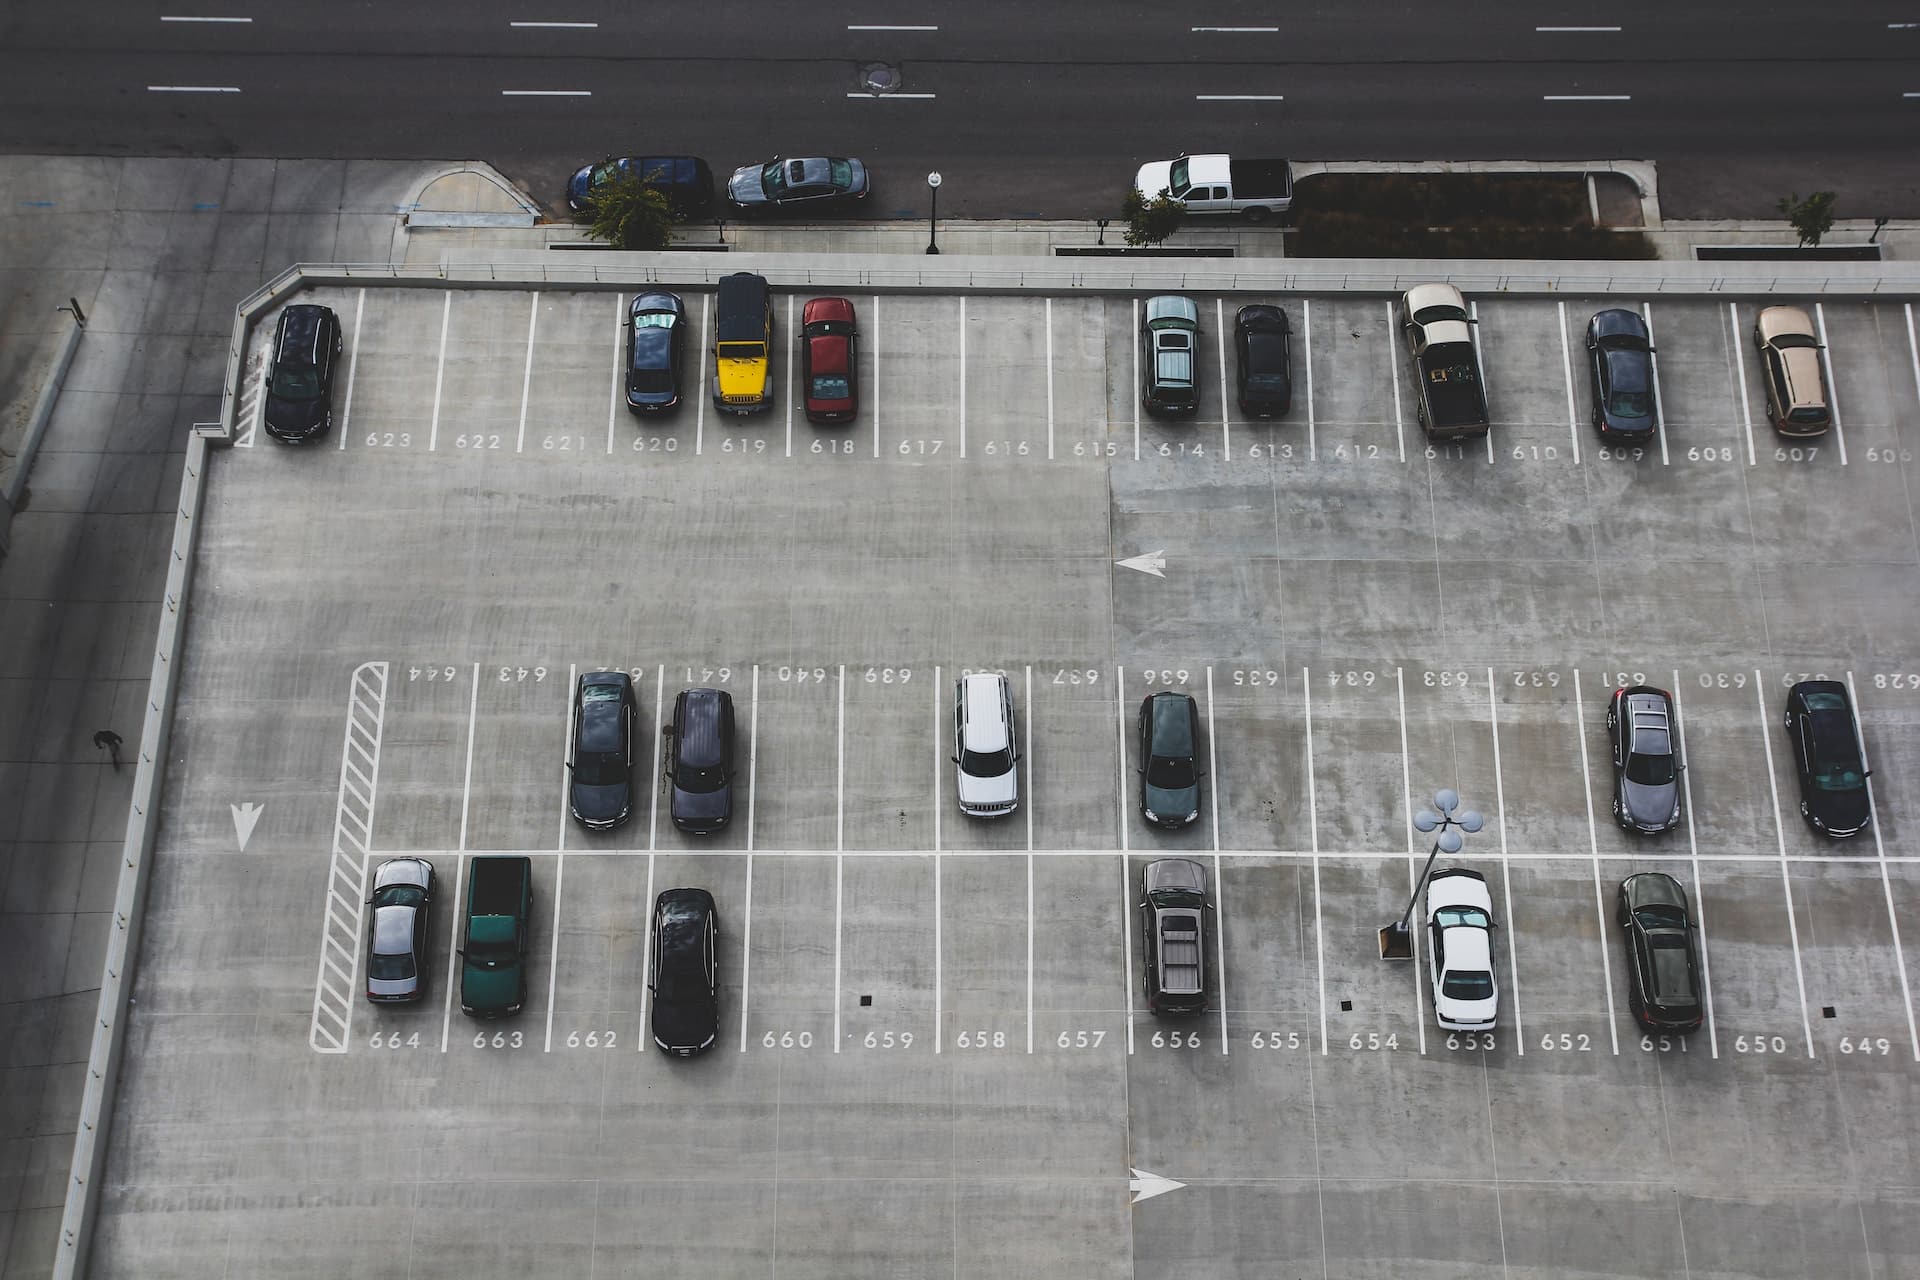 photo of outdoor parking lot to represent dispute over parking lot closure